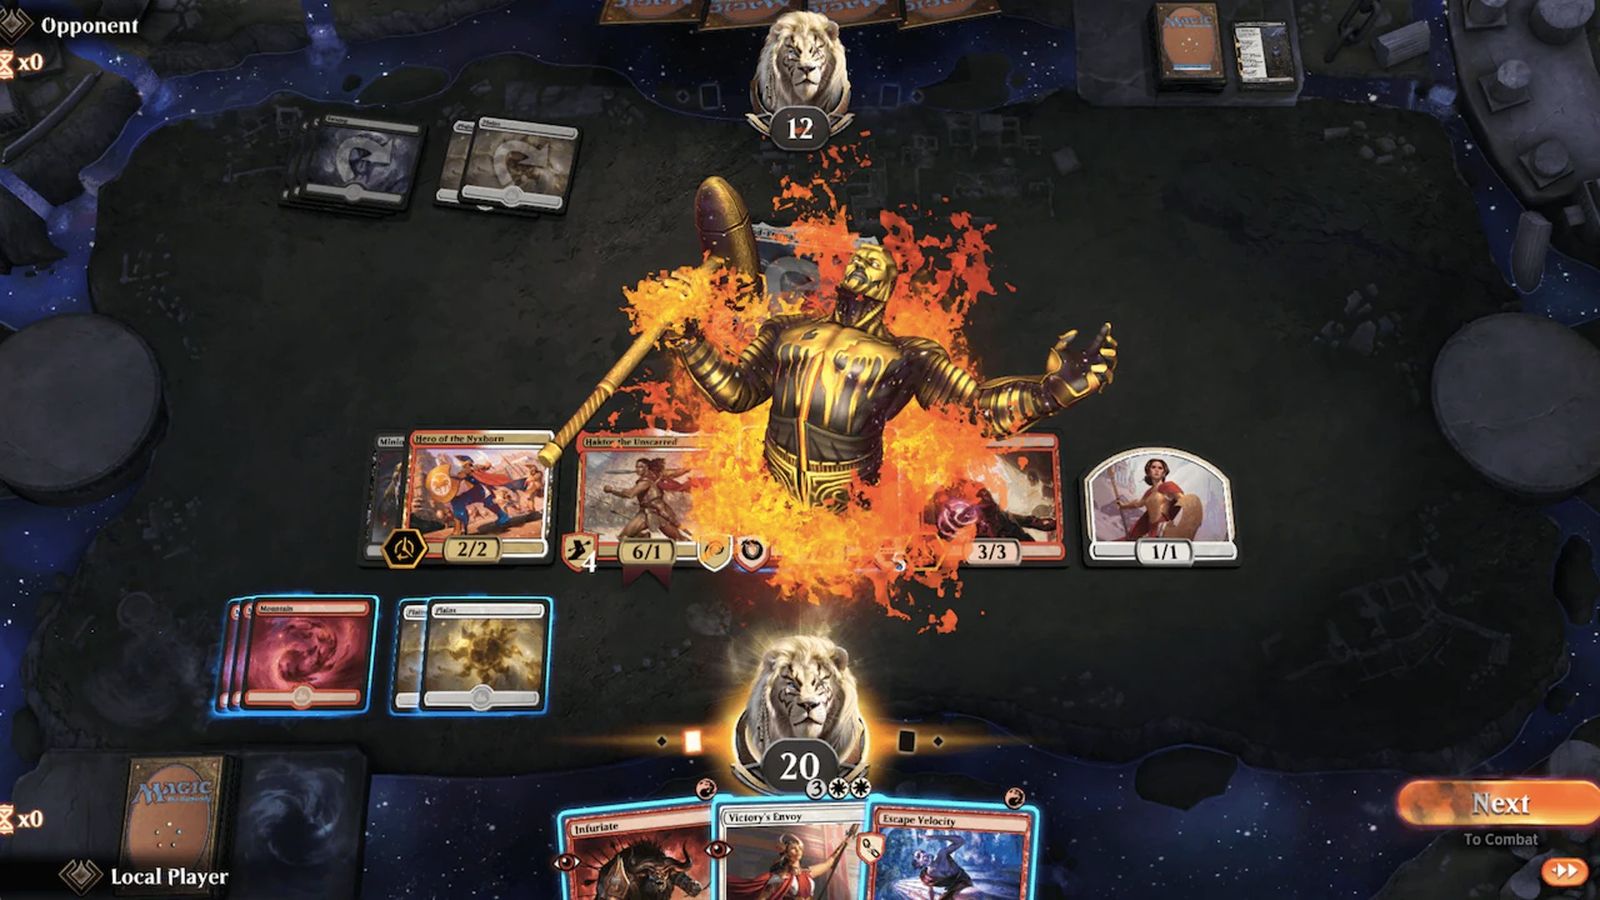 Image of a card game in progress in Magic: The Gathering Arena